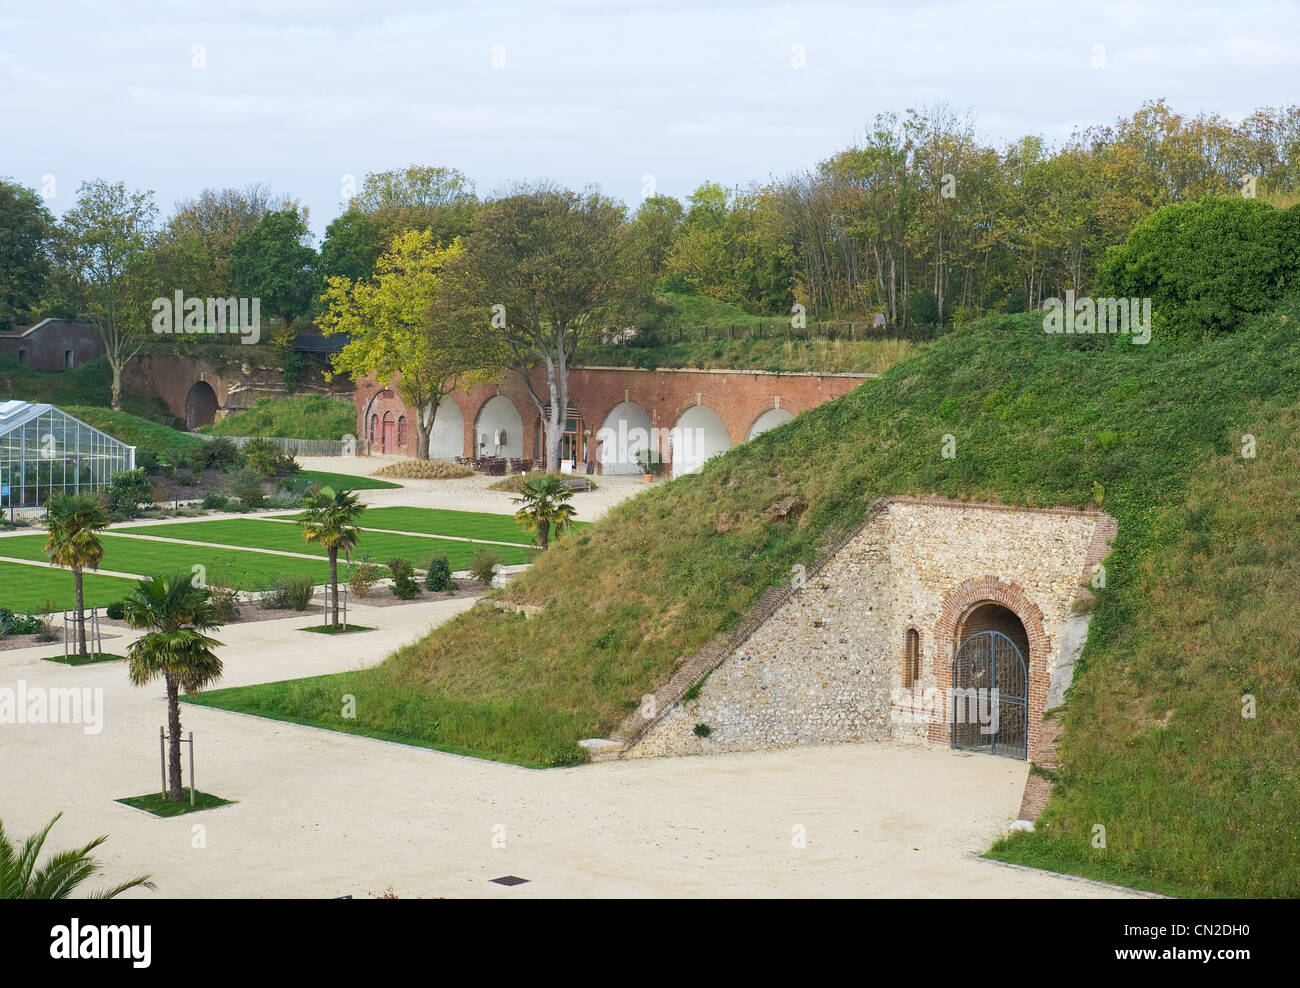 The Jardins Suspendus, hanging gardens of Le Havre, were set up in the  reconverted Fort Sainte-Adresse, Normandy,France Stock Photo - Alamy